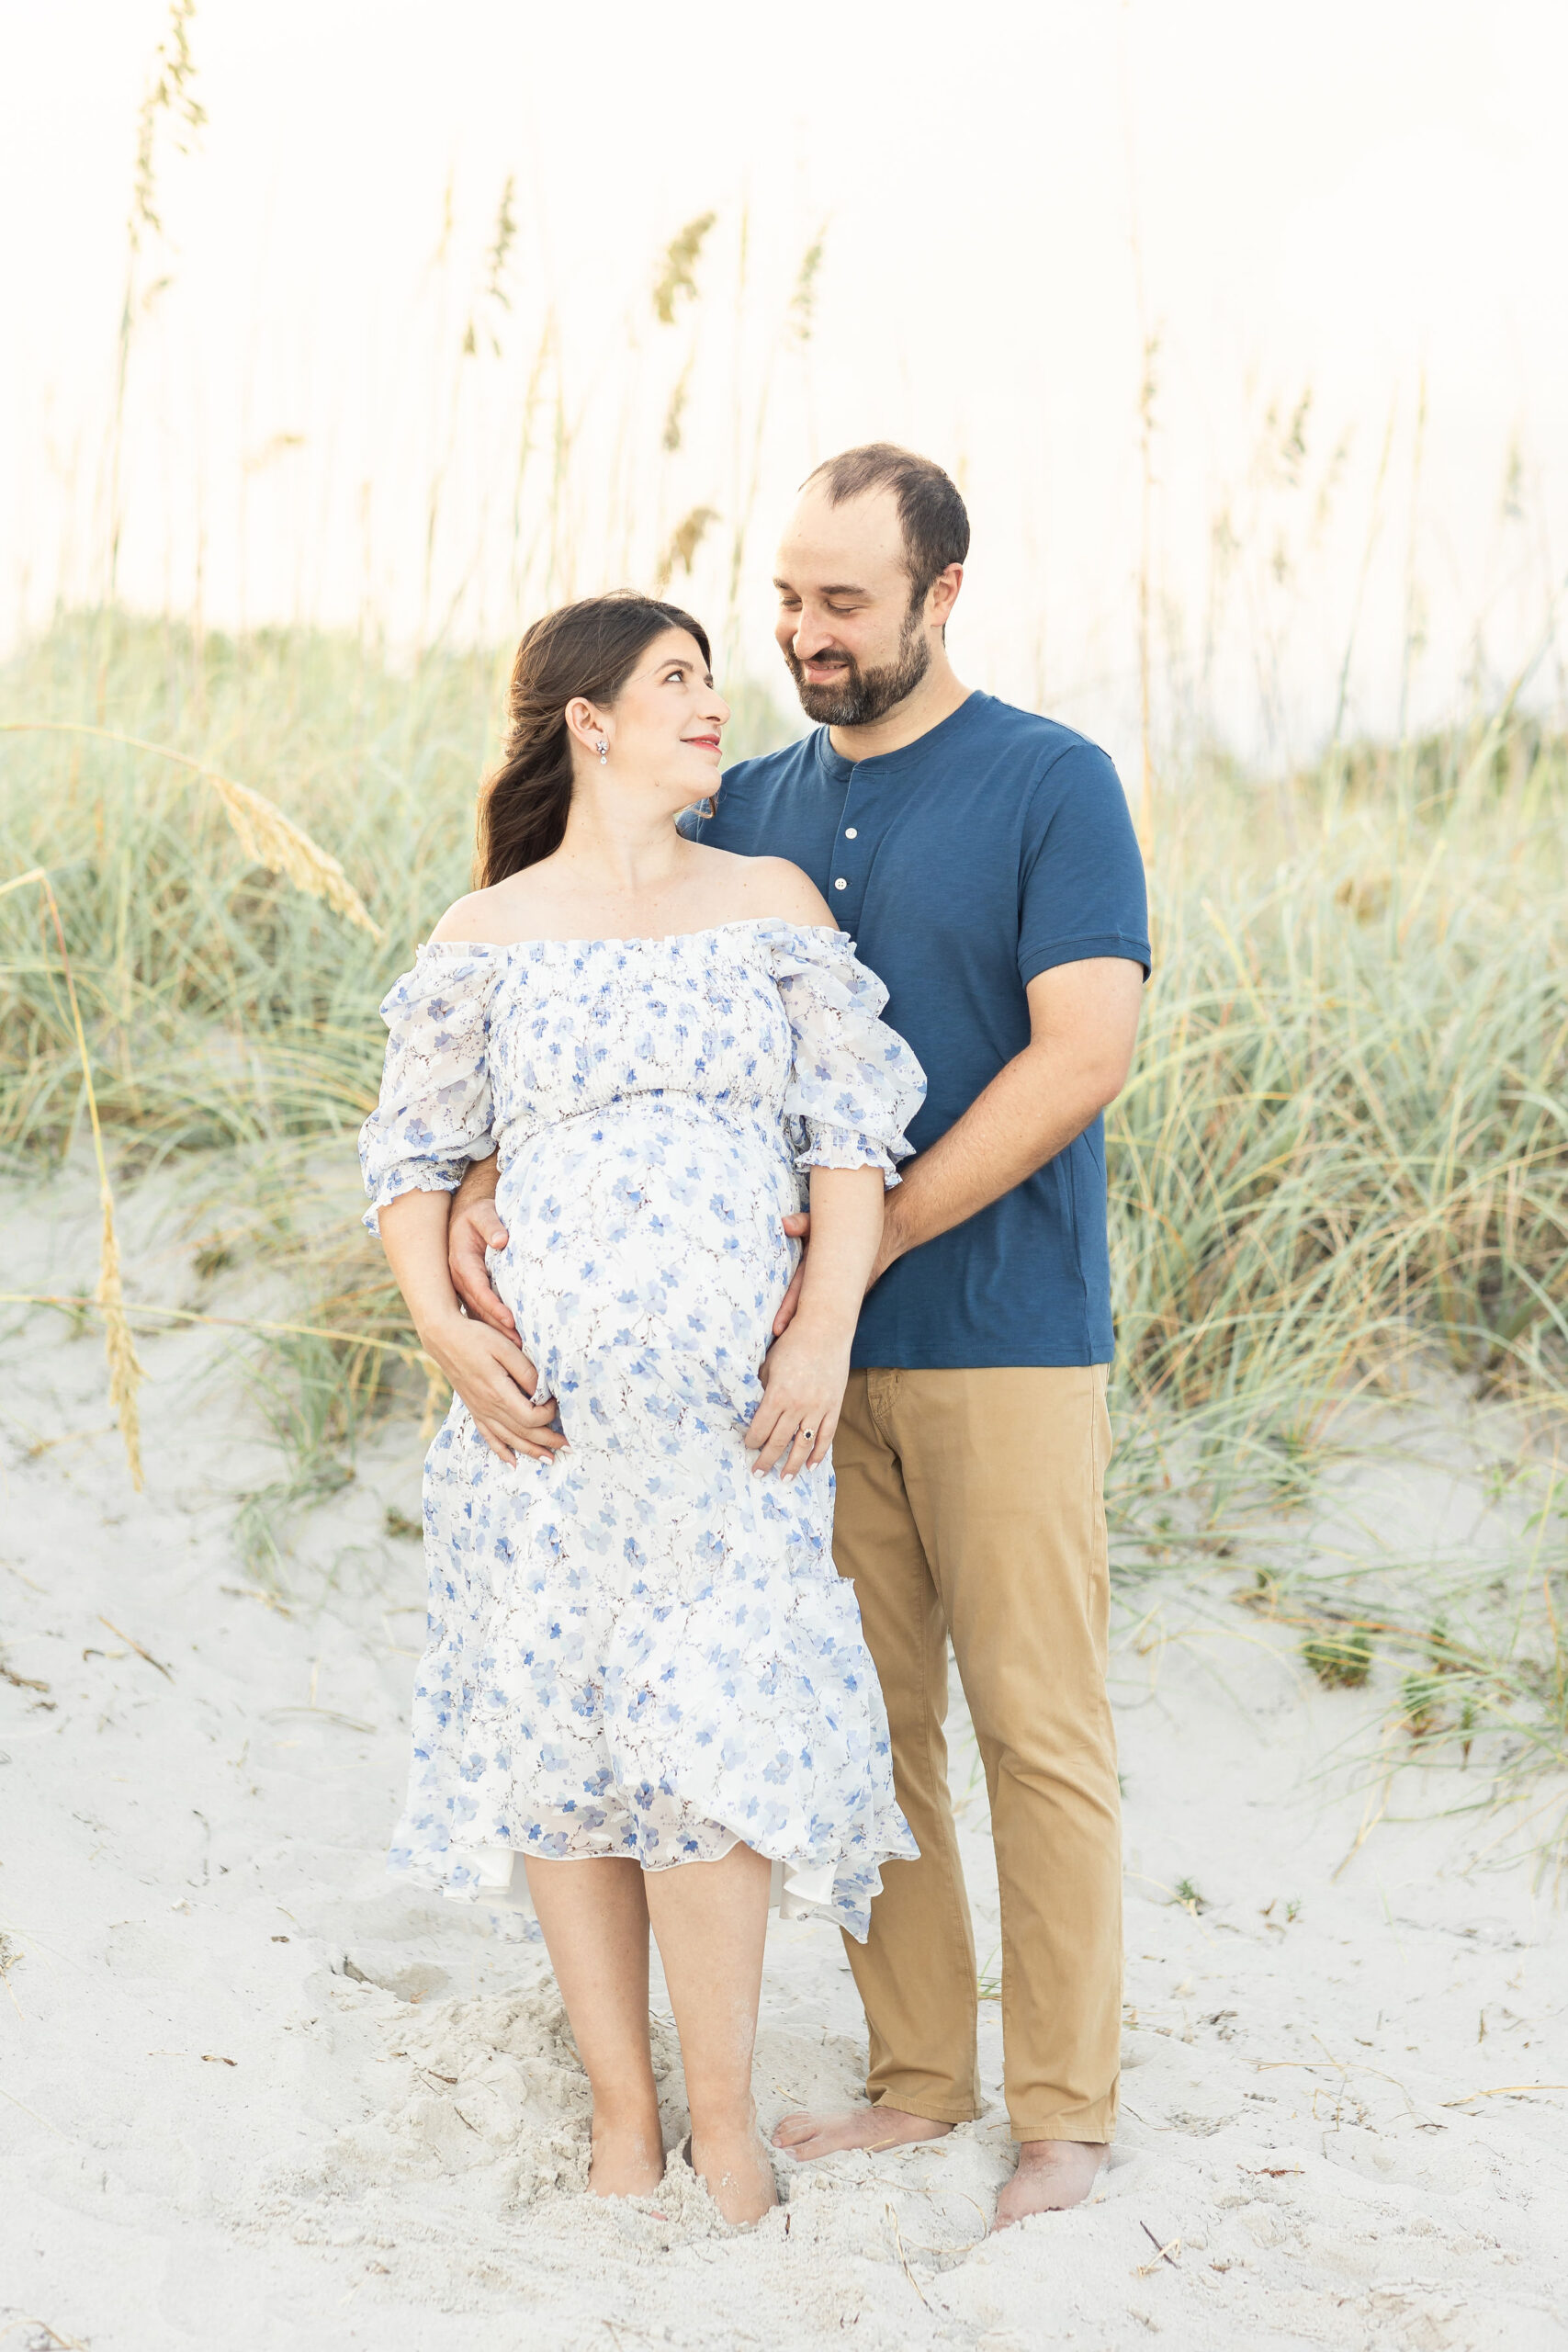 A mother to be in a blue floral print maternity dress stands on a beach smiling up to her husband holding the bump after amazing births and beyond